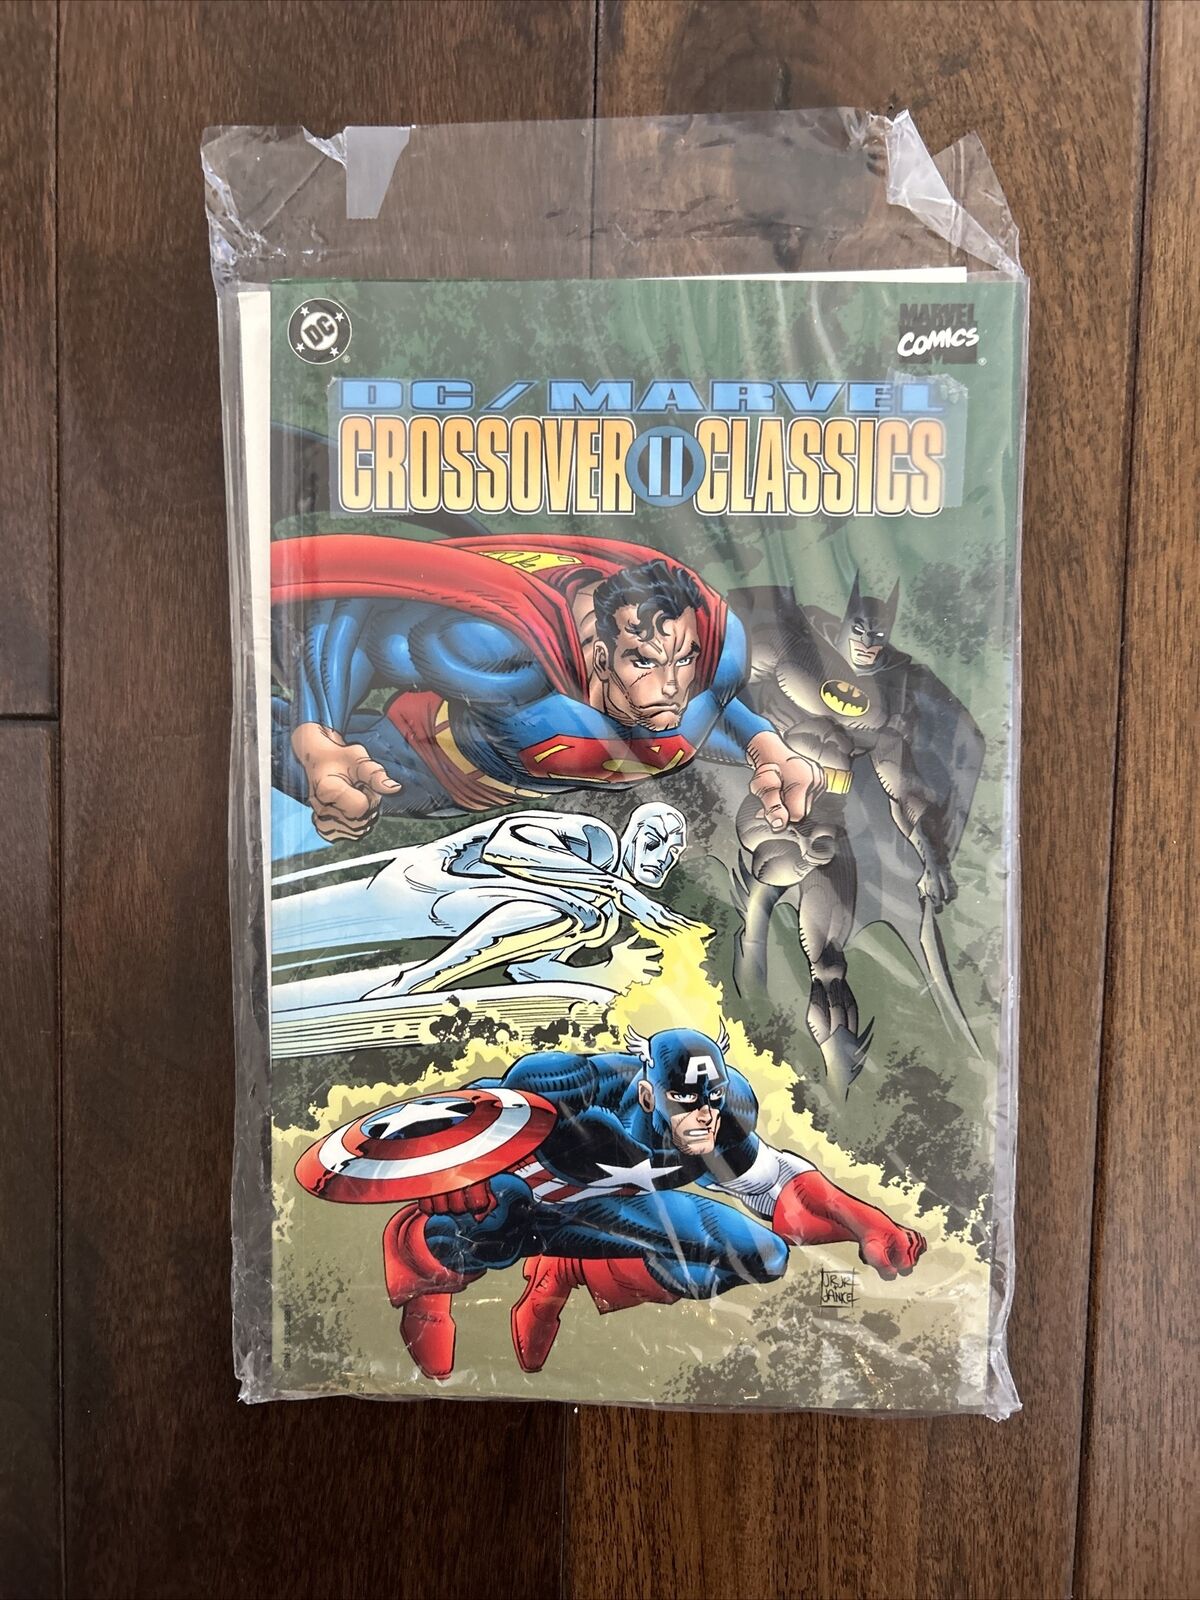 DC/Marvel: Crossover Classics II by DC Comics: Used